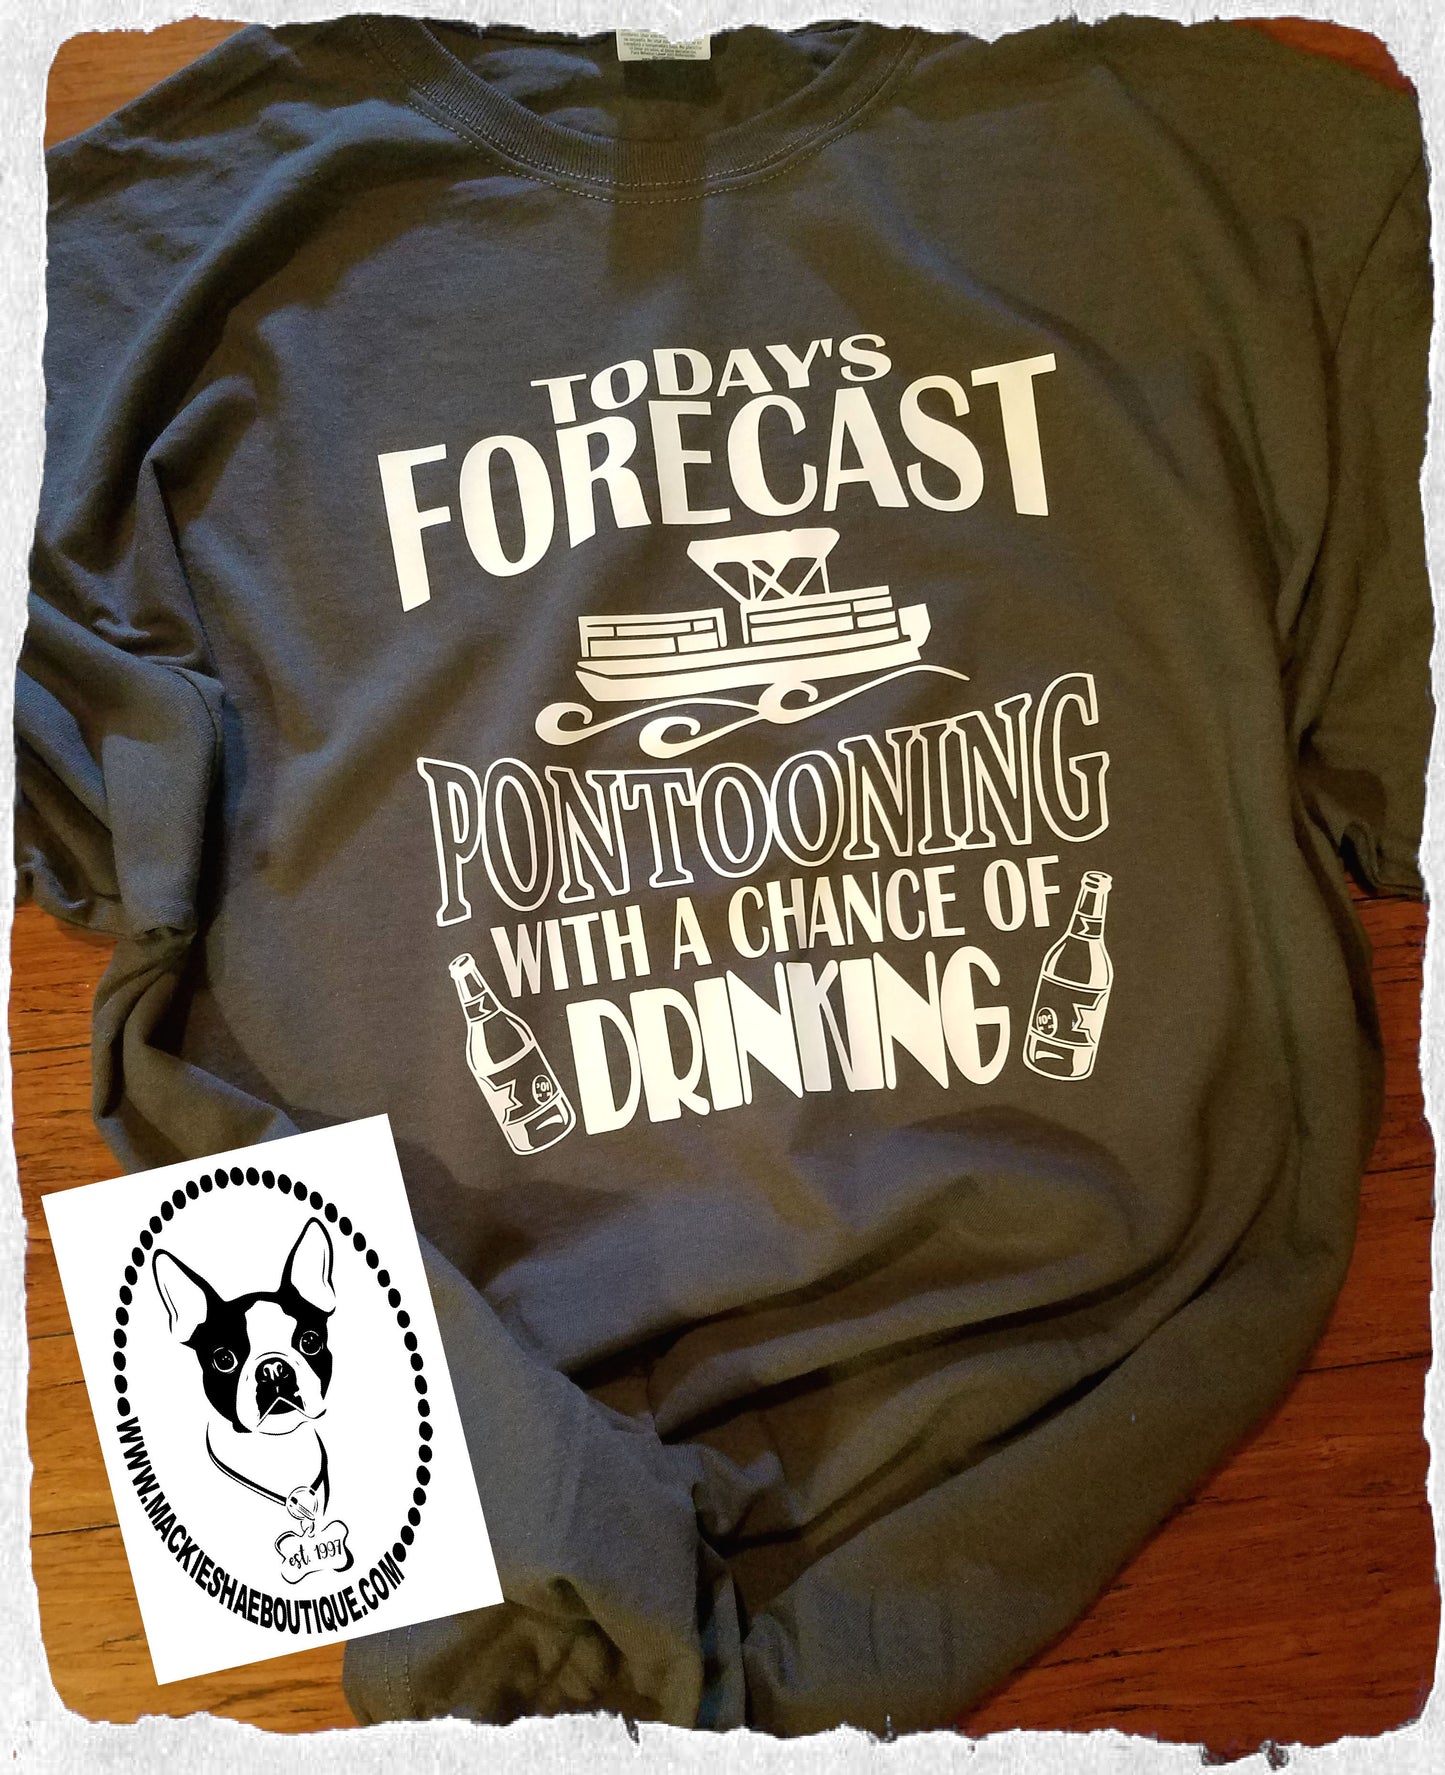 Today's Forecast... Pontooning with A Chance of Drinking Custom Shirt, Short-Sleeve